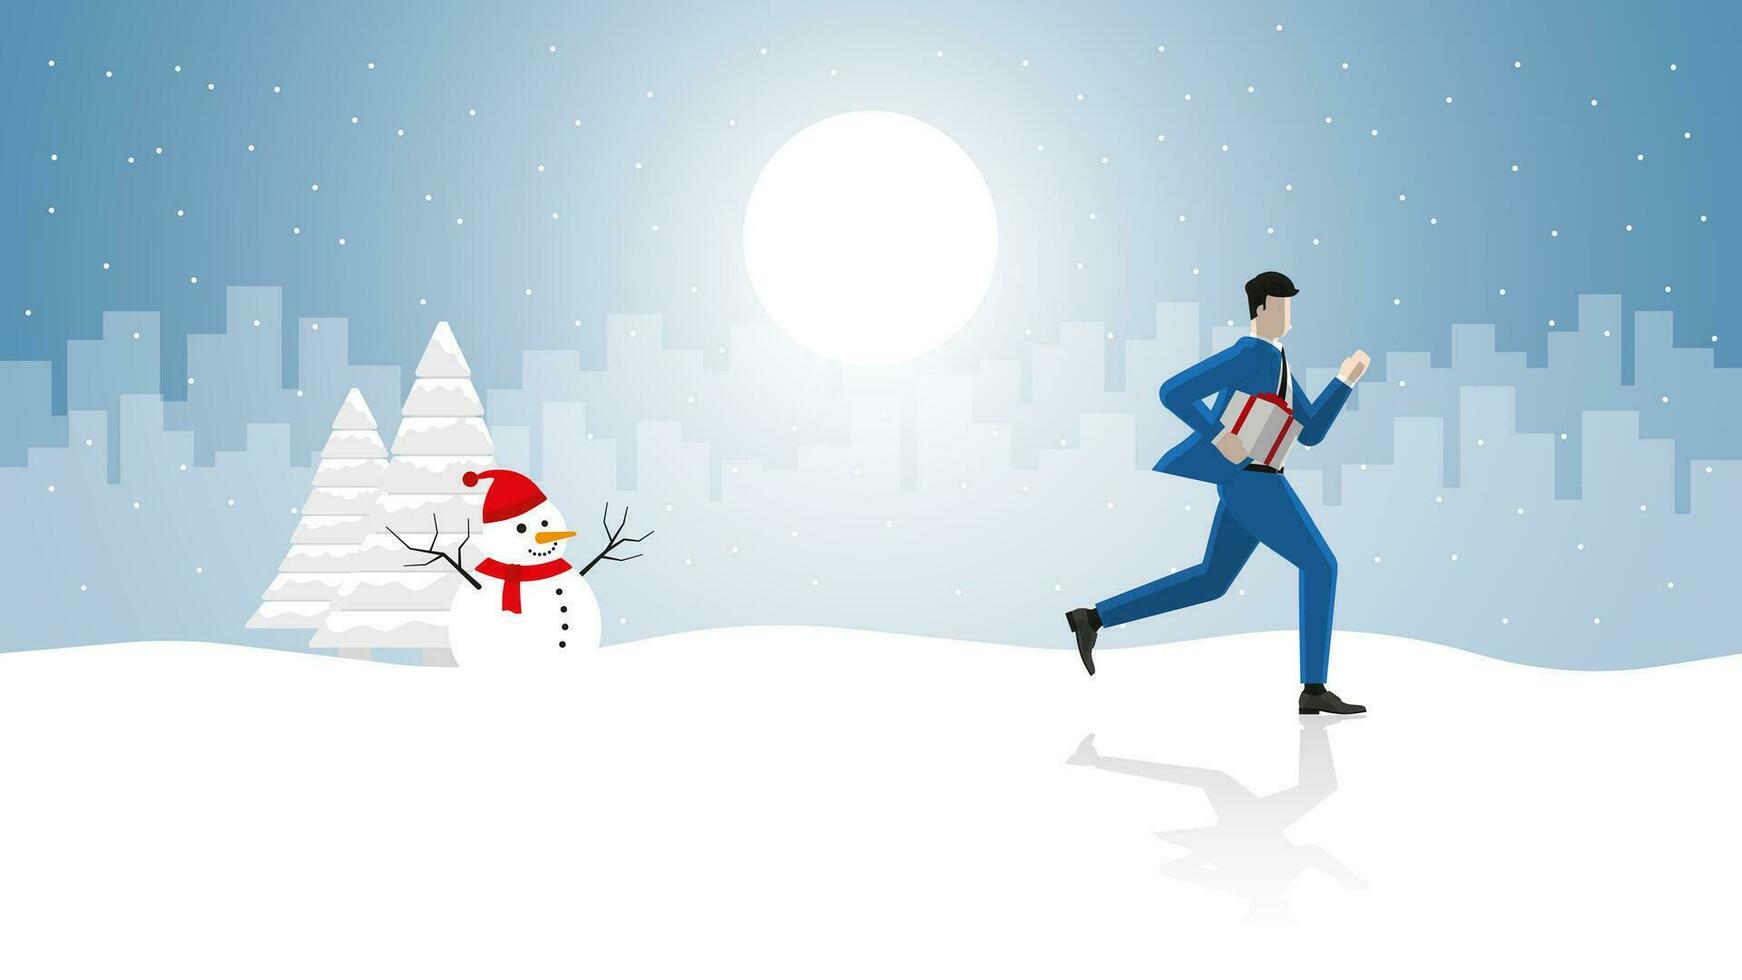 Festival celebration. Christmas and New year in winter December. Businessman running with gift box vector